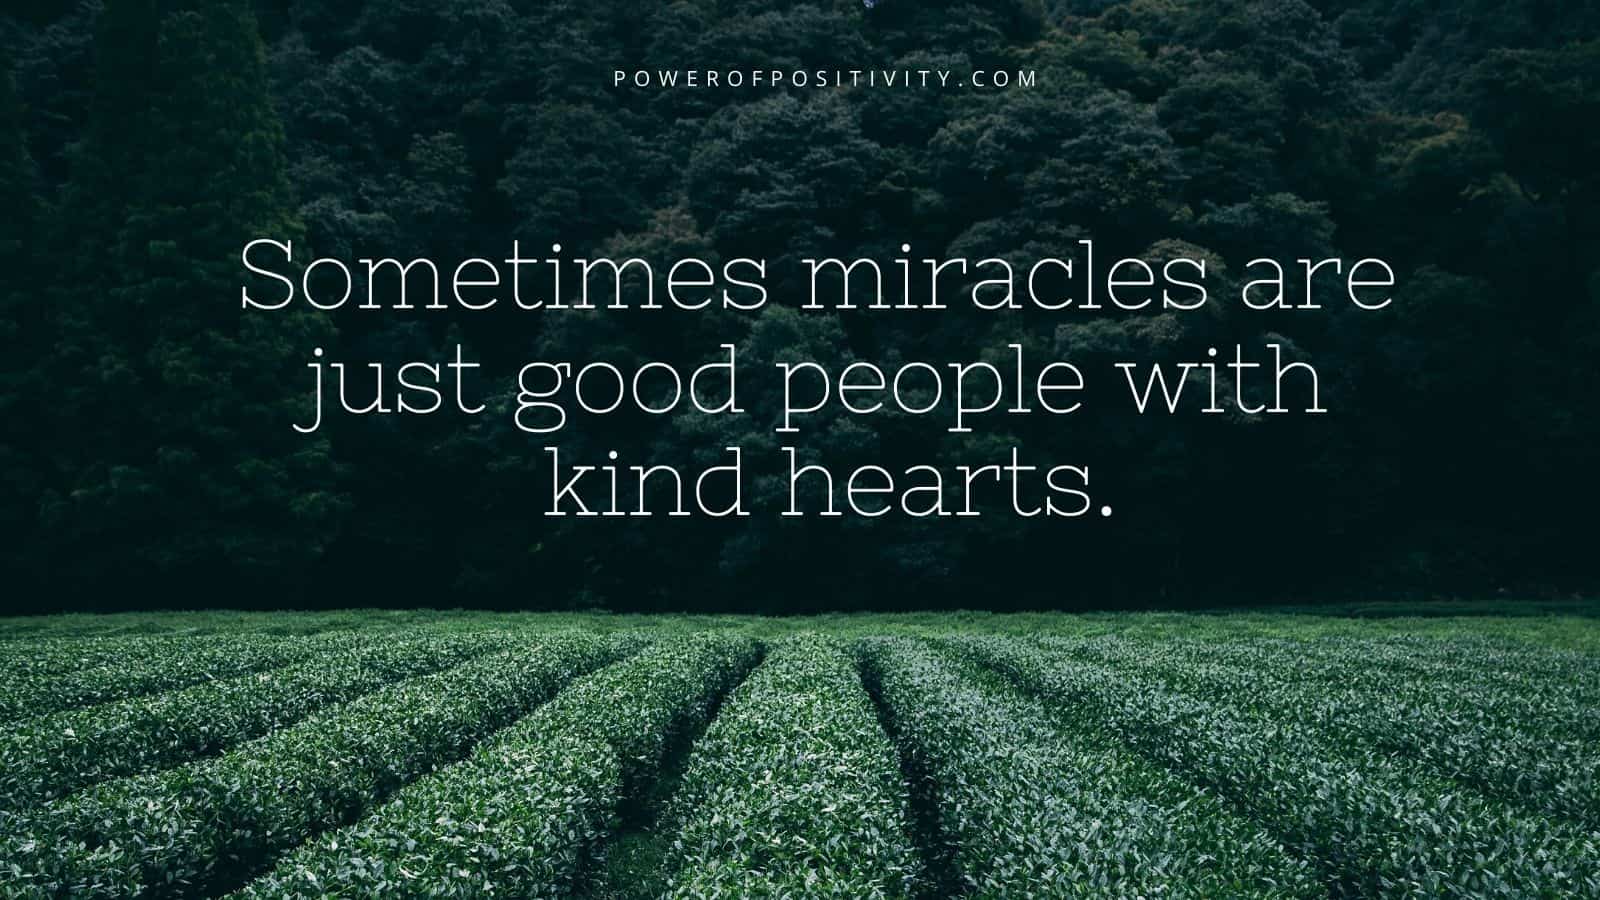 15 Quotes About Kindness Everyone Needs to Hear | 5 Minute Read